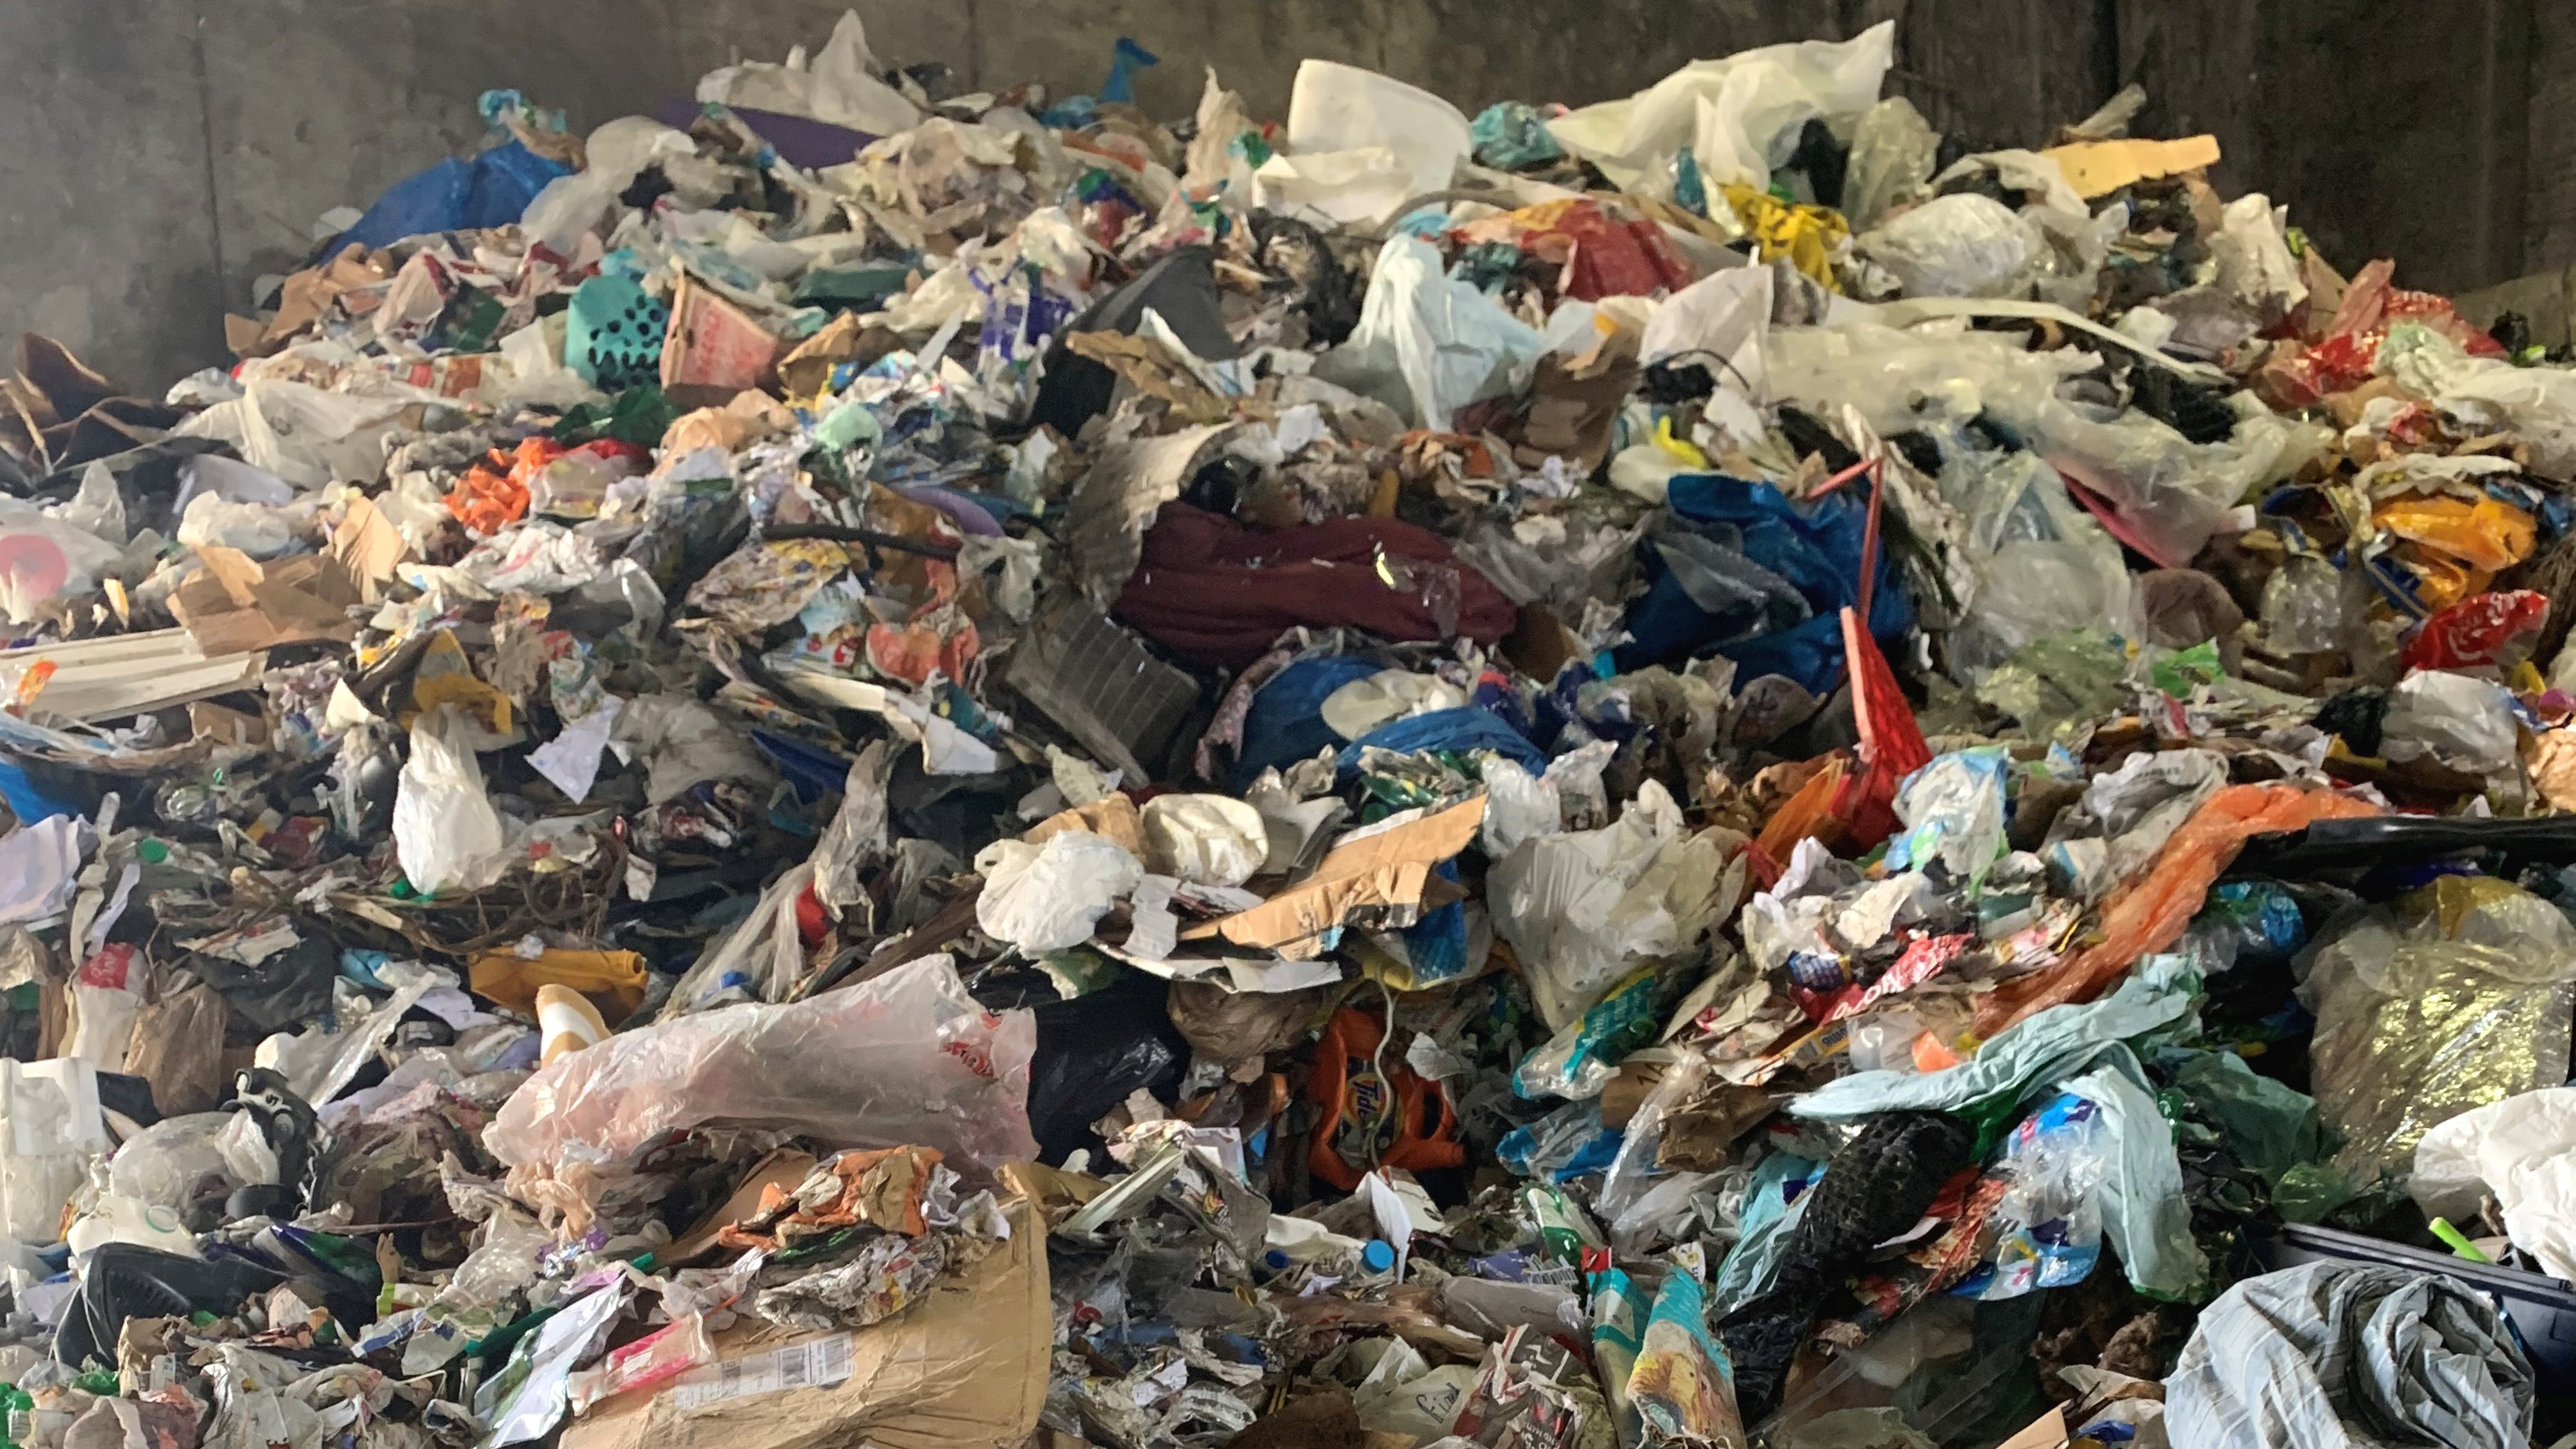 RECYCLING CRISIS: Why it is Getting More Expensive and Difficult in South Florida – NBC 6 South Florida